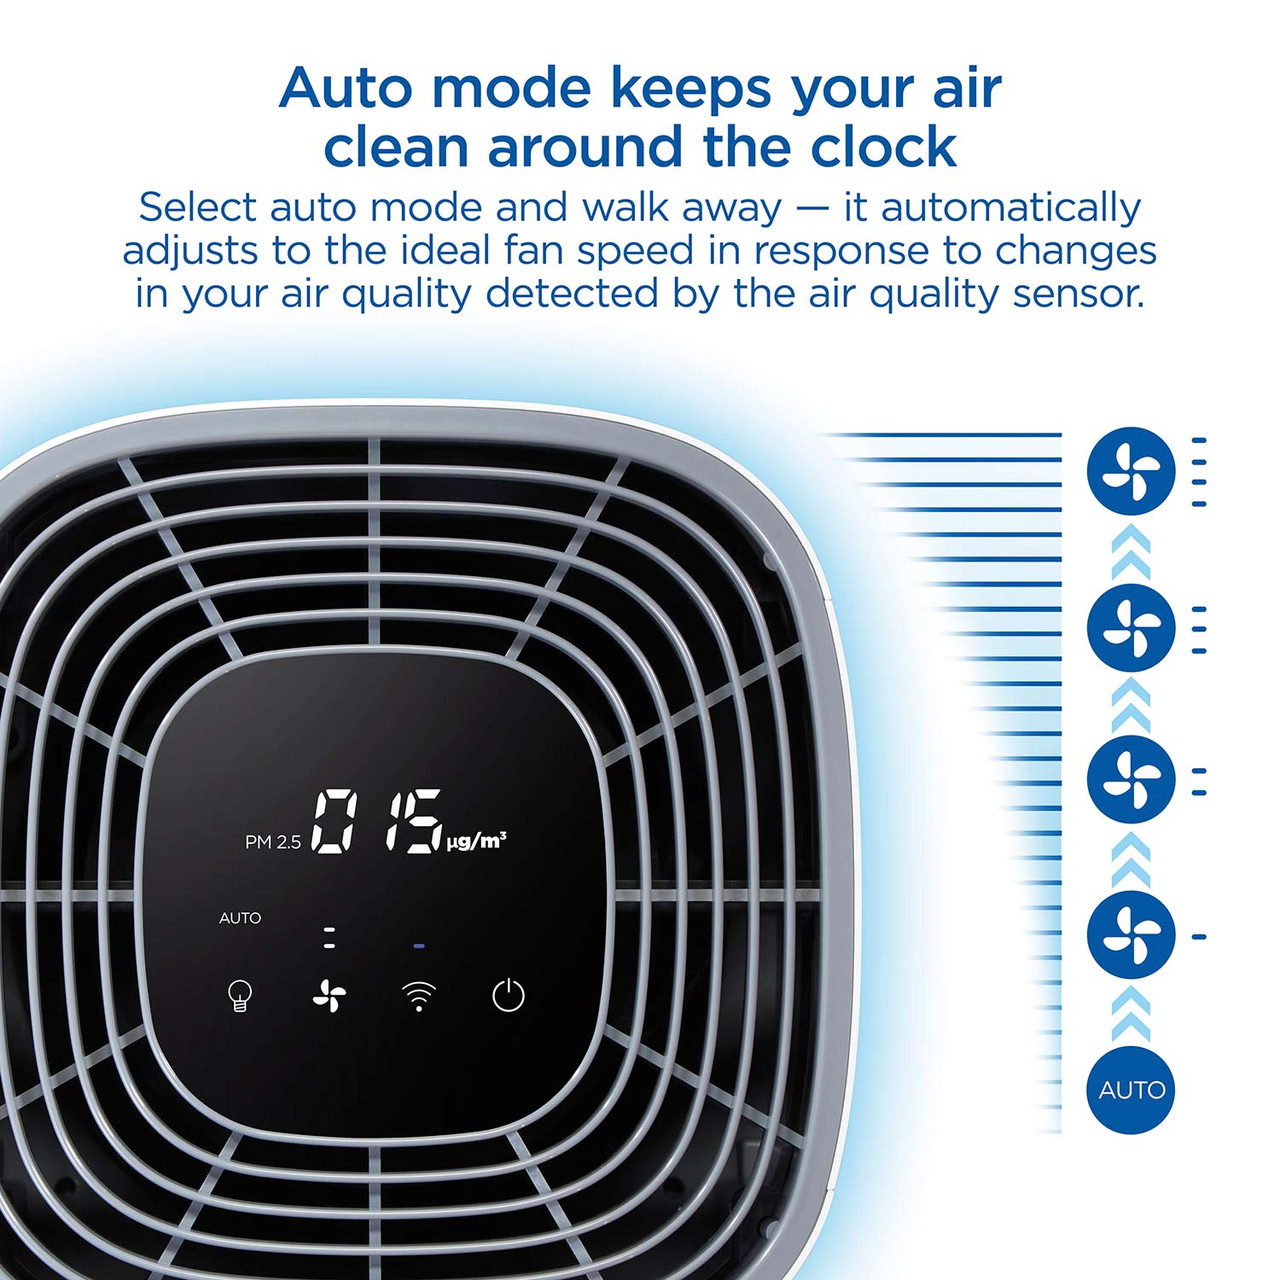 Auto mode keeps your air clean around the clock, select auto mode and walk away - it automatically adjusts to the ideal fan speed in response to changes in your air quality detected by the air quality sensor, works with Alexa